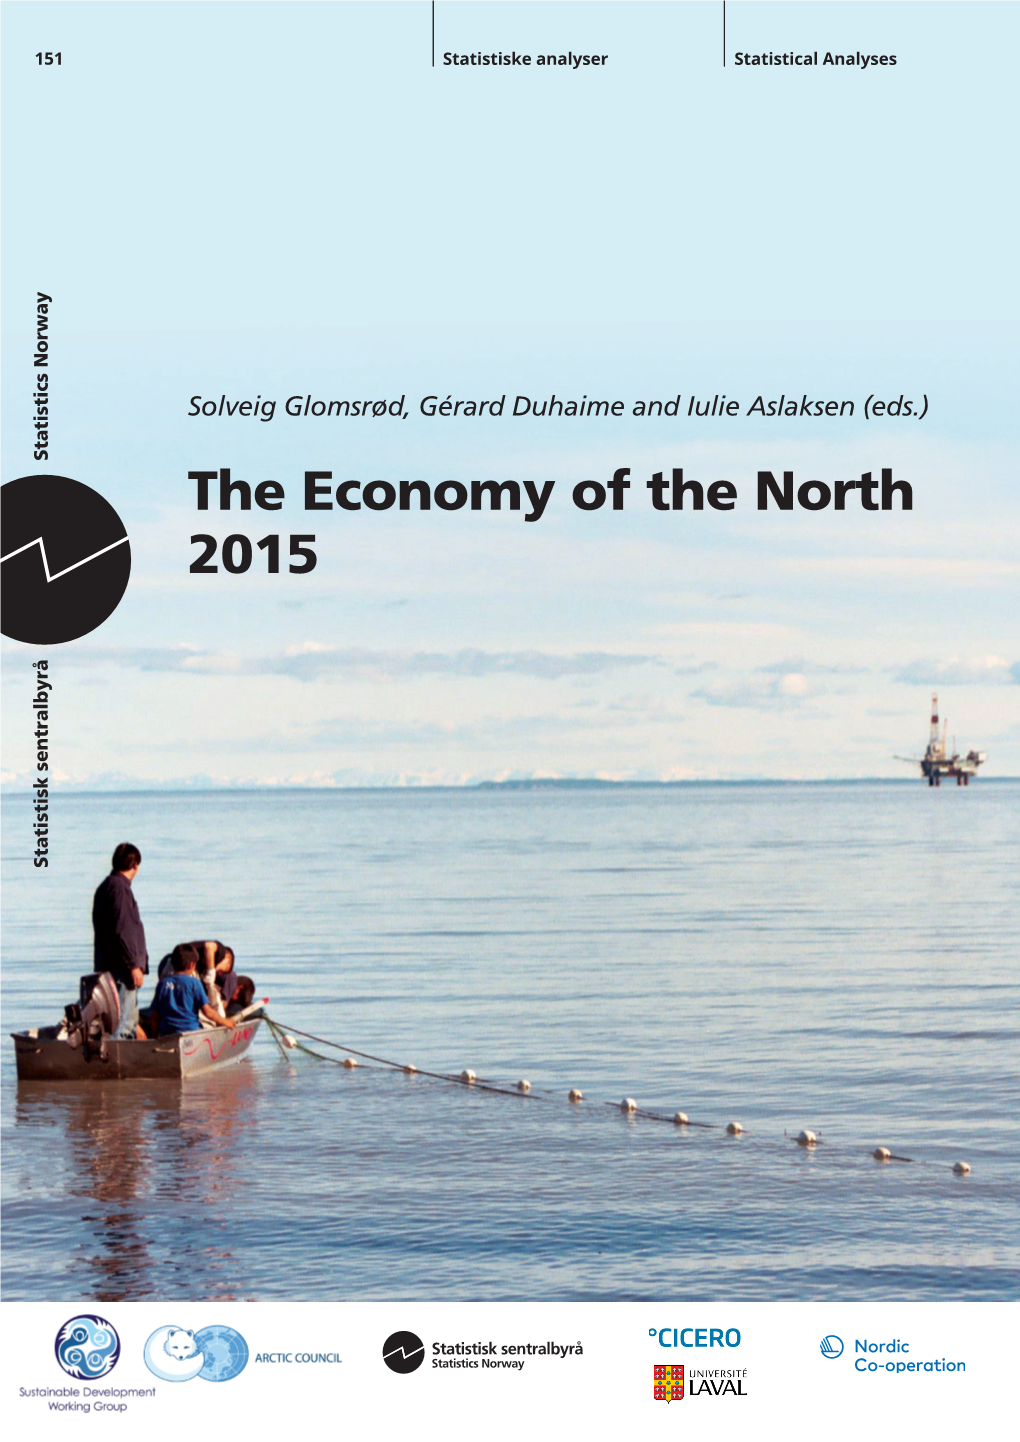 The Economy of the North 2015